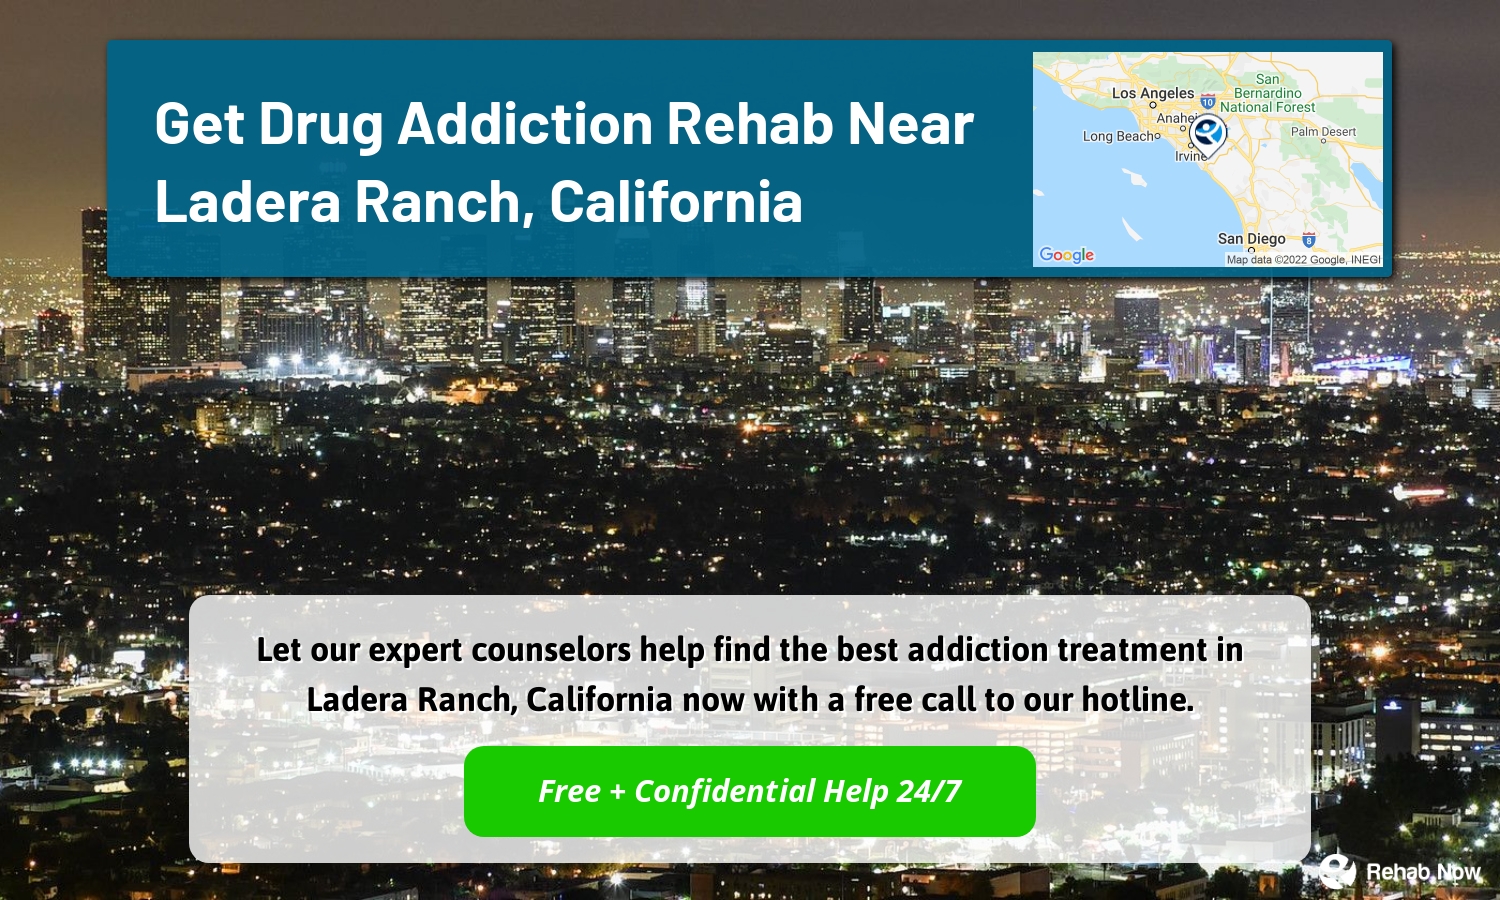 Let our expert counselors help find the best addiction treatment in Ladera Ranch, California now with a free call to our hotline.